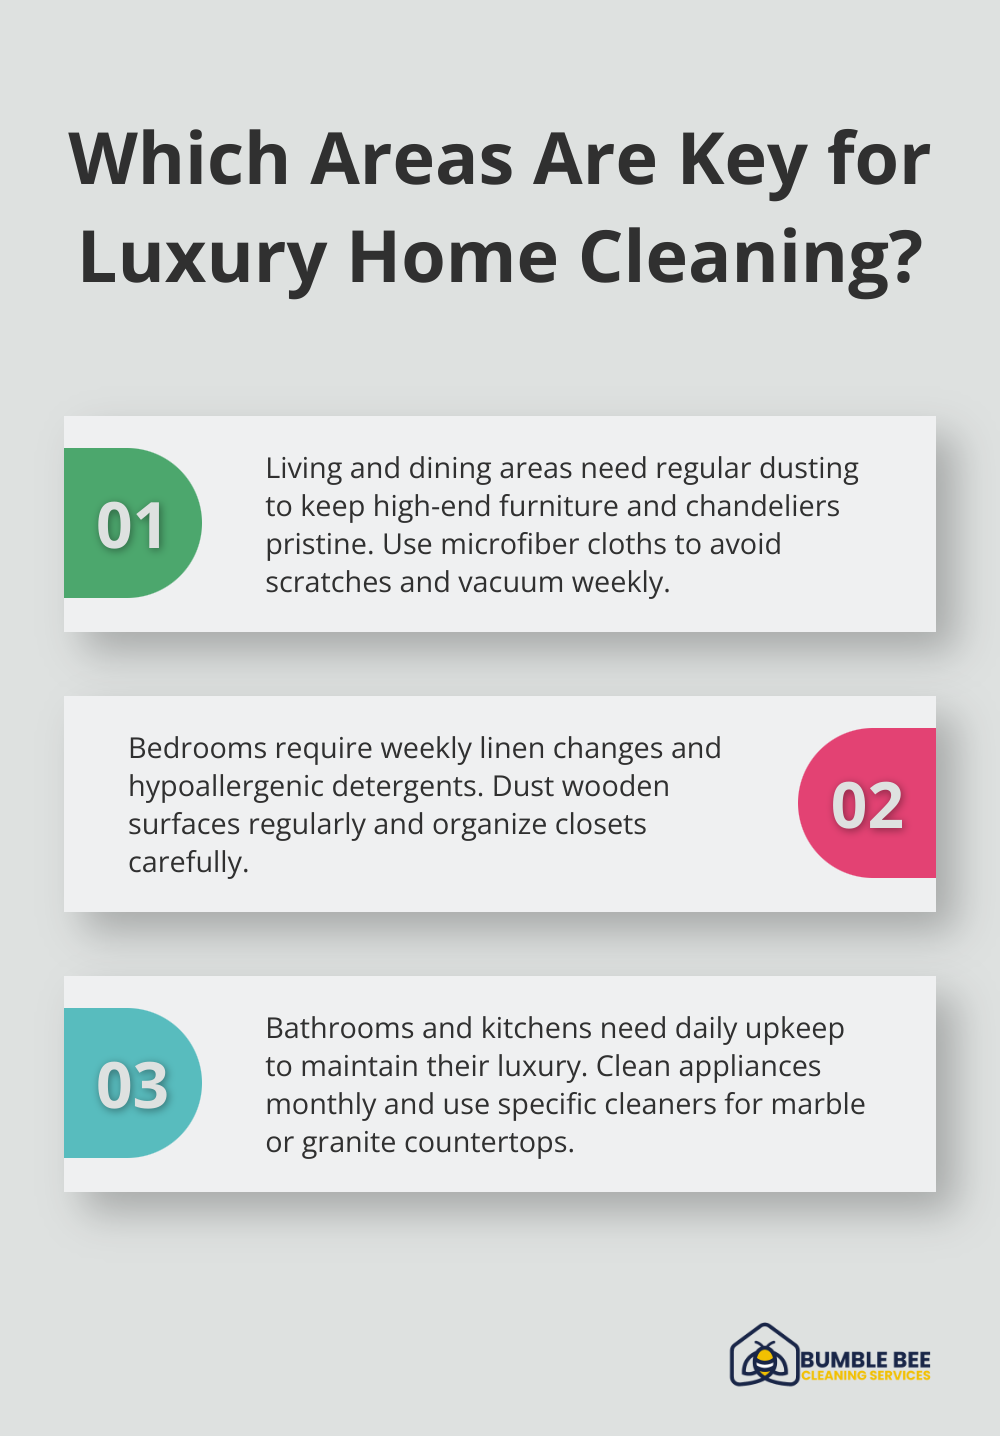 Fact - Which Areas Are Key for Luxury Home Cleaning?